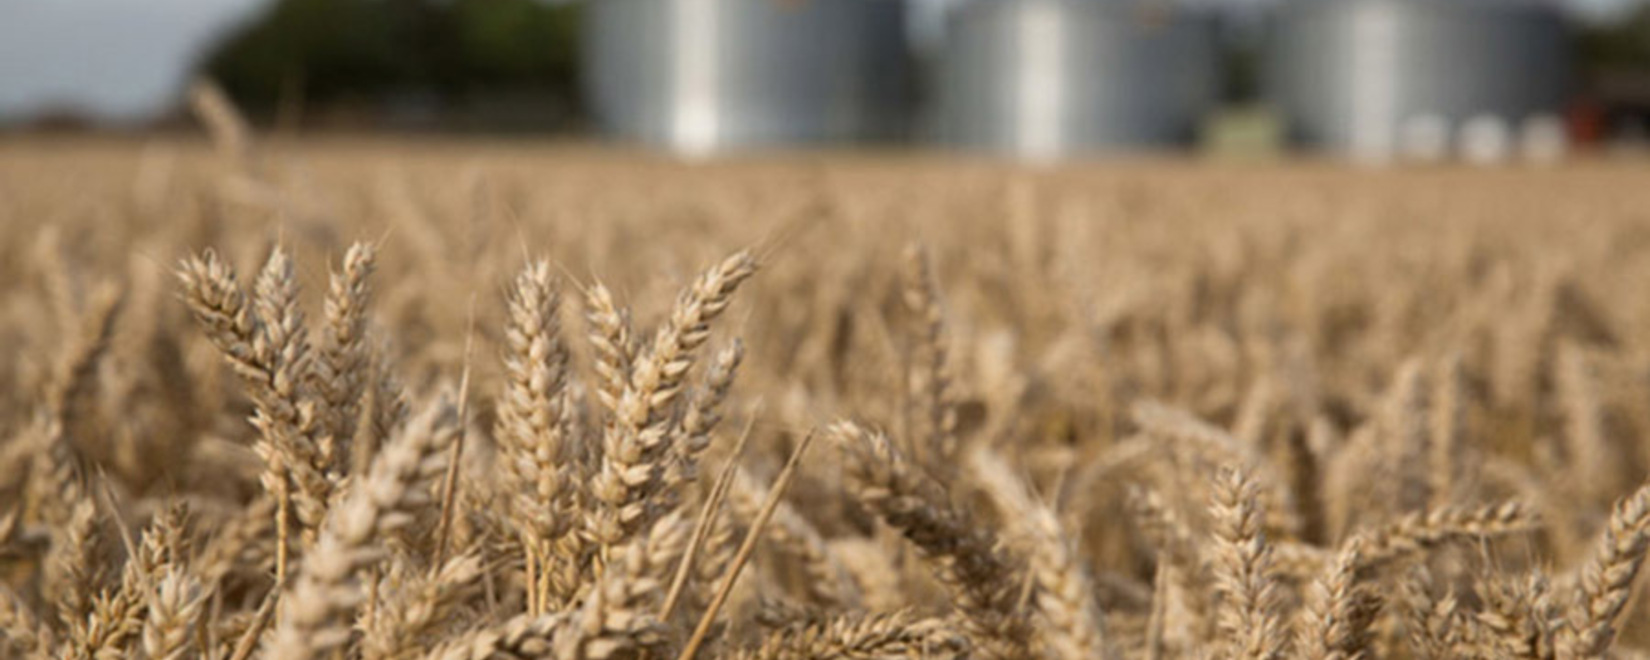 The largest grain trader from Rostov reduced exports by 1 million tons